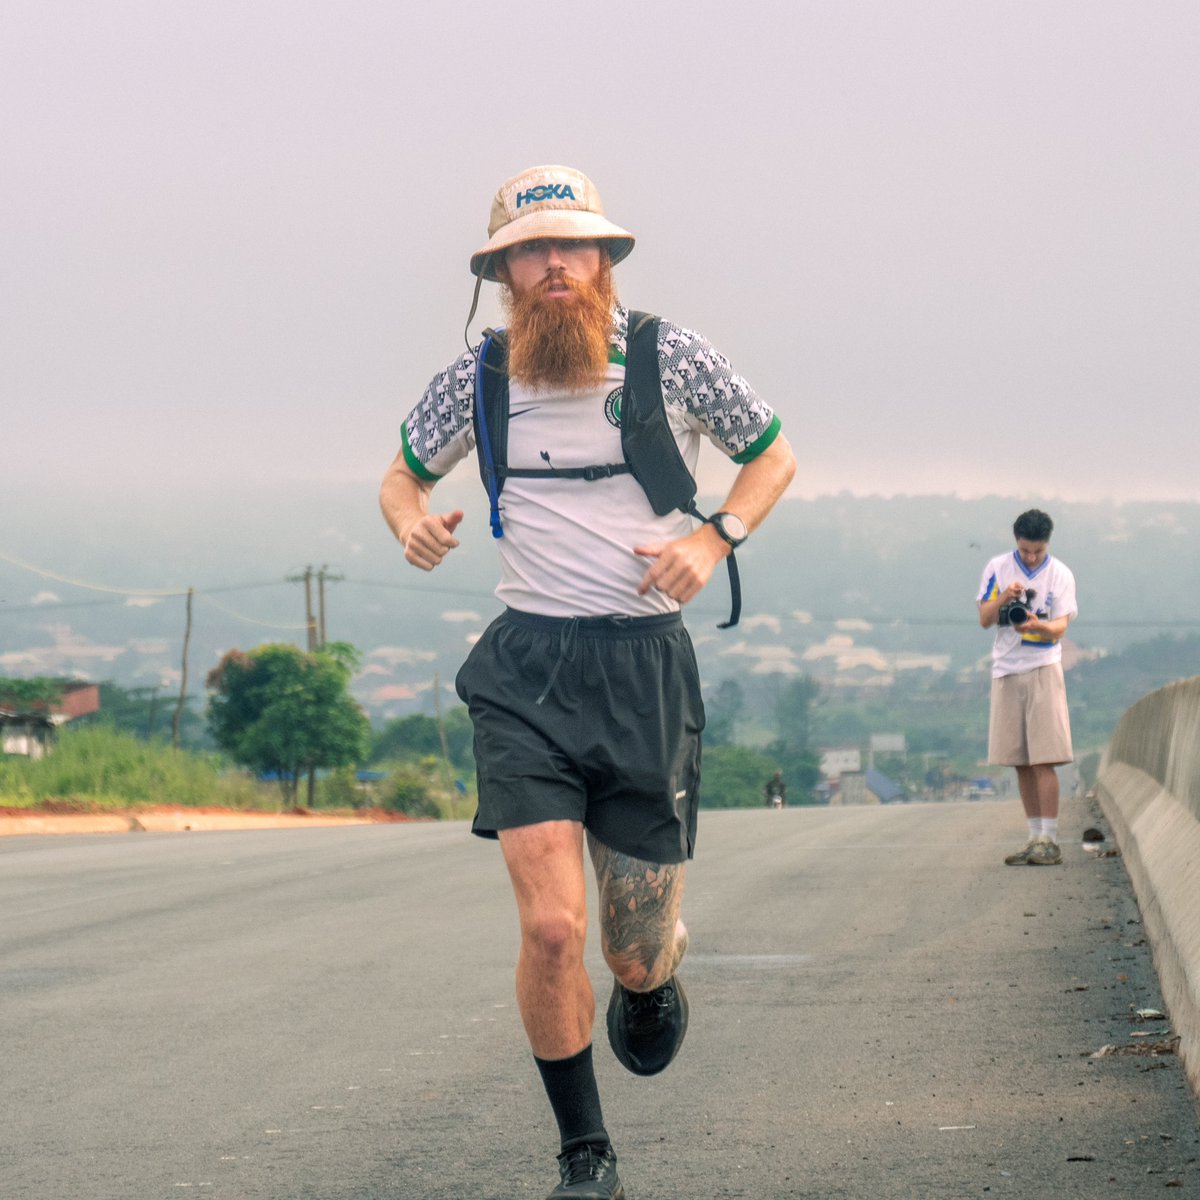 The main man @hardestgeezer has completed his challenge, running the entire length of Africa. 🤯 Not only is it an insane achievement, he’s worn some beautiful shirts along the way. 🌍 Congratulations, Russ! What an incredible feat. Truly the HARDEST Geezer.